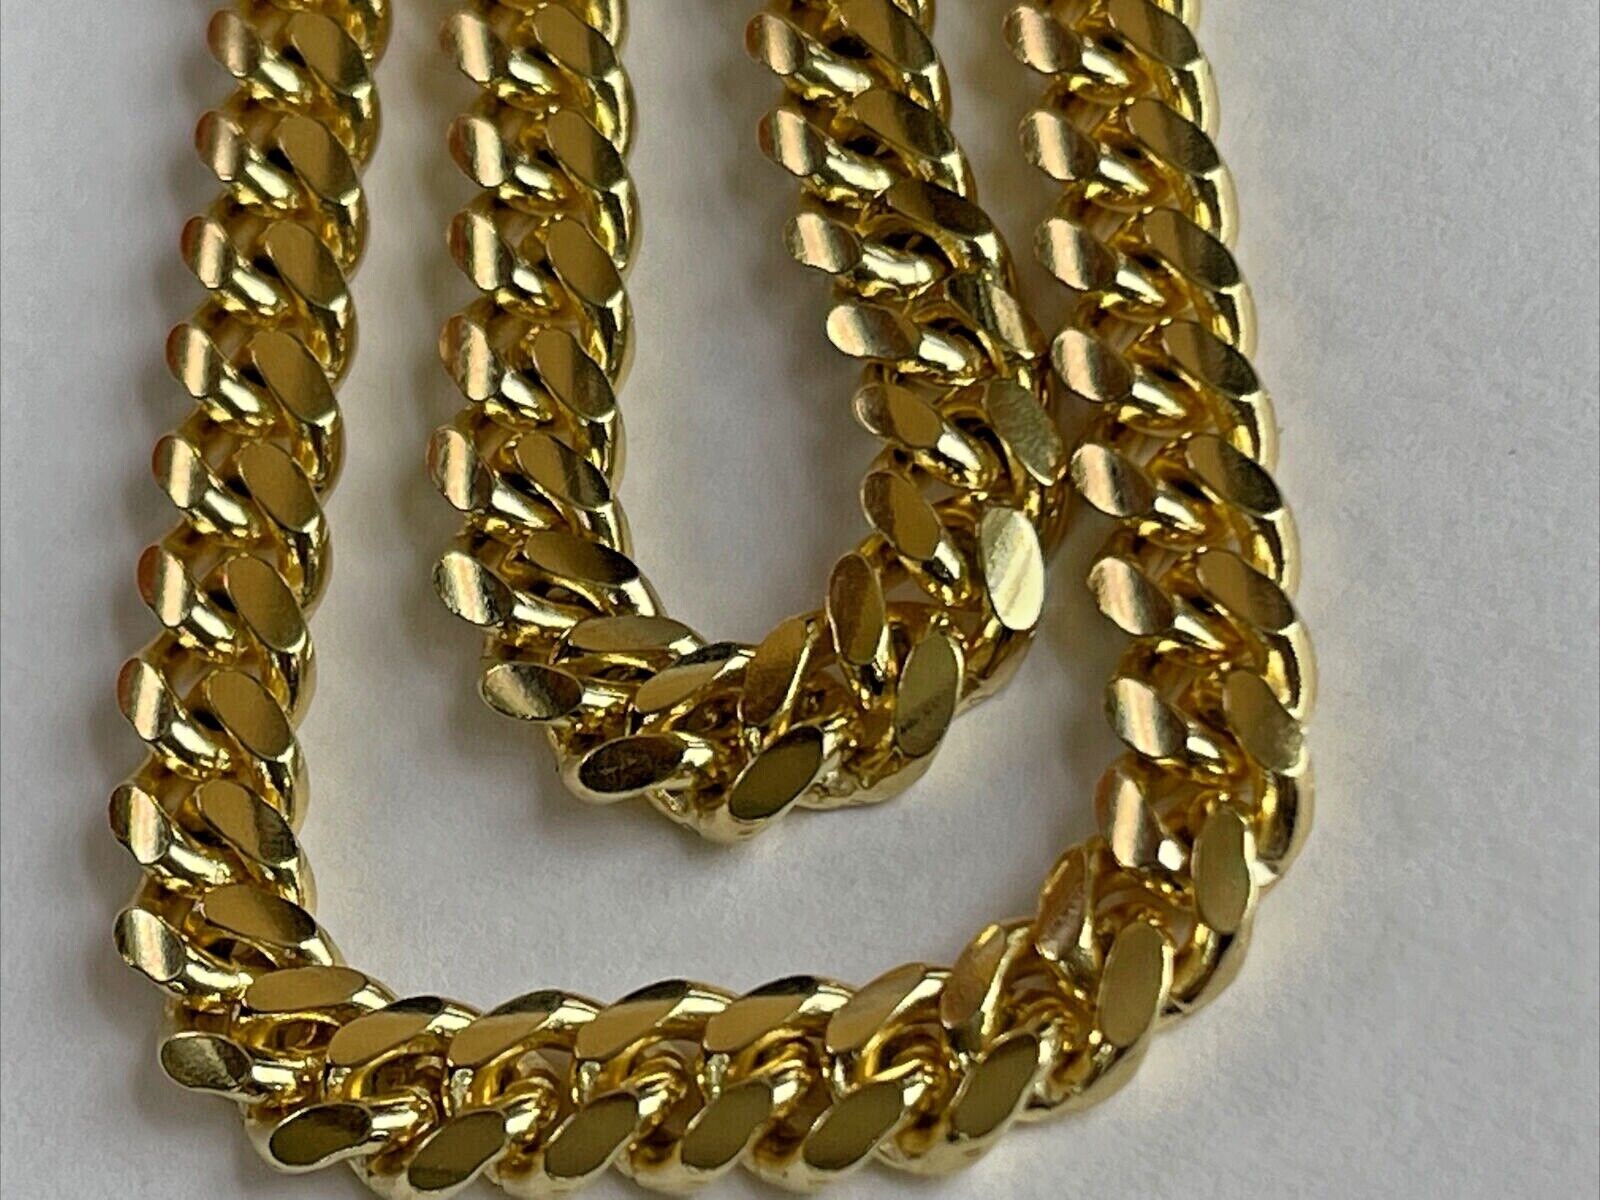 14K Real Gold Cuban Link Chain - 1.9mm 2.15mm 2.9mm 3.8mm 4.75mm Diamond Cut Concave Cuban Curb Chain Pendant Necklace for Men - Dainty Gold